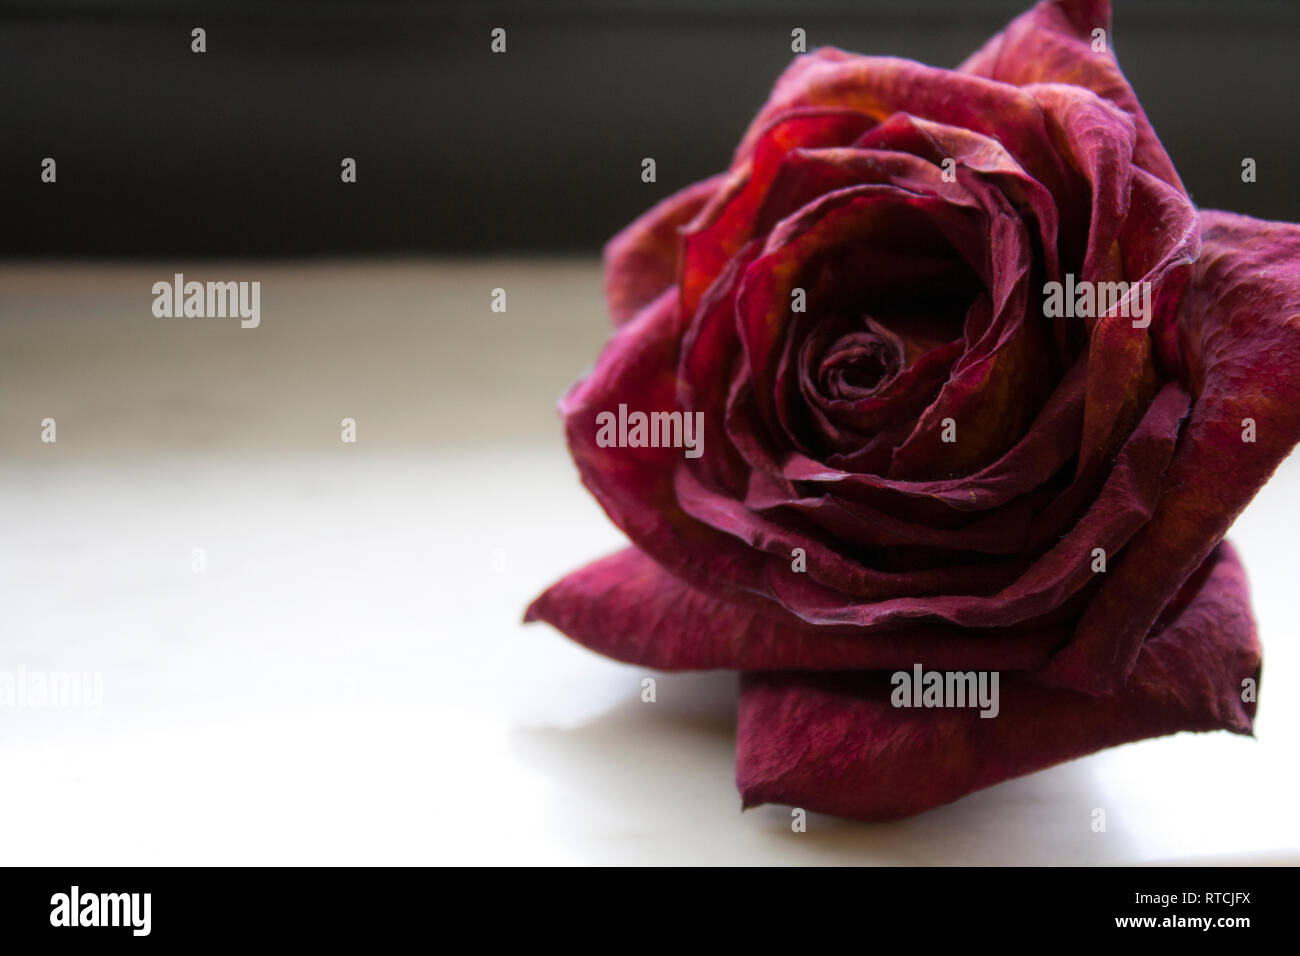 A Rose Hung to Dry Made for a Beautiful Subject. Stock Photo